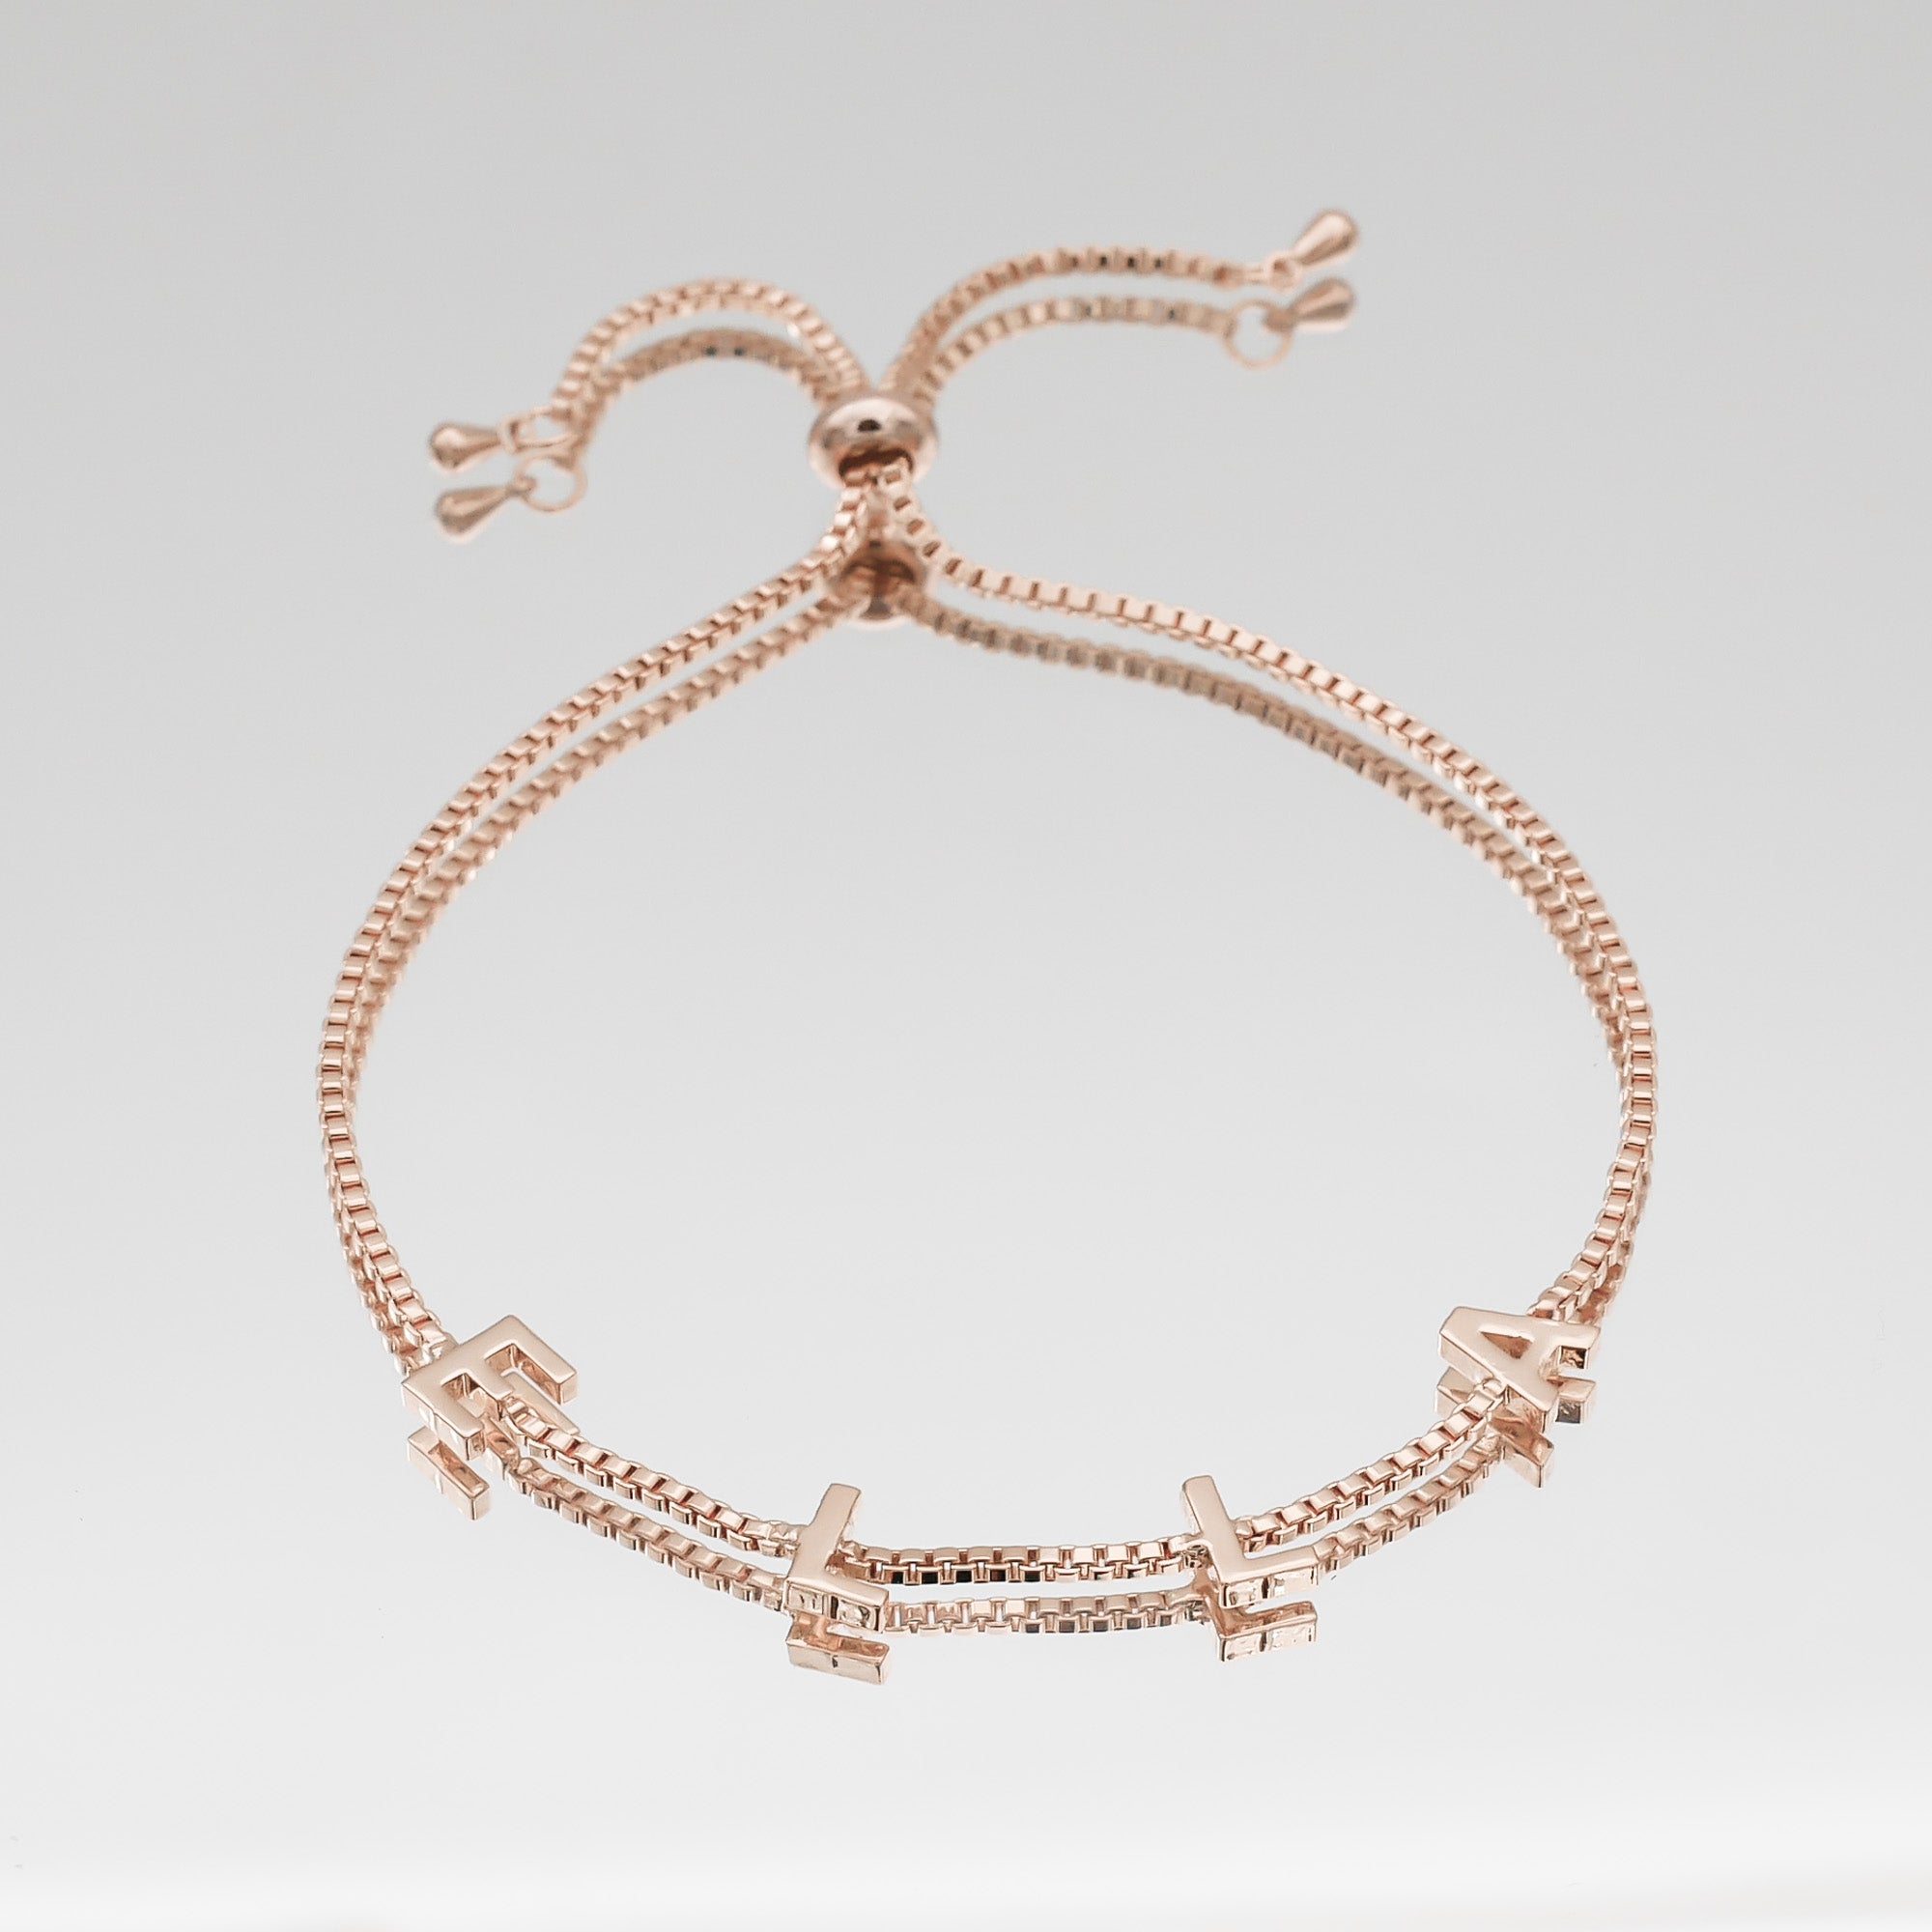 Classic personalised name bracelet in 14K rose gold with charm